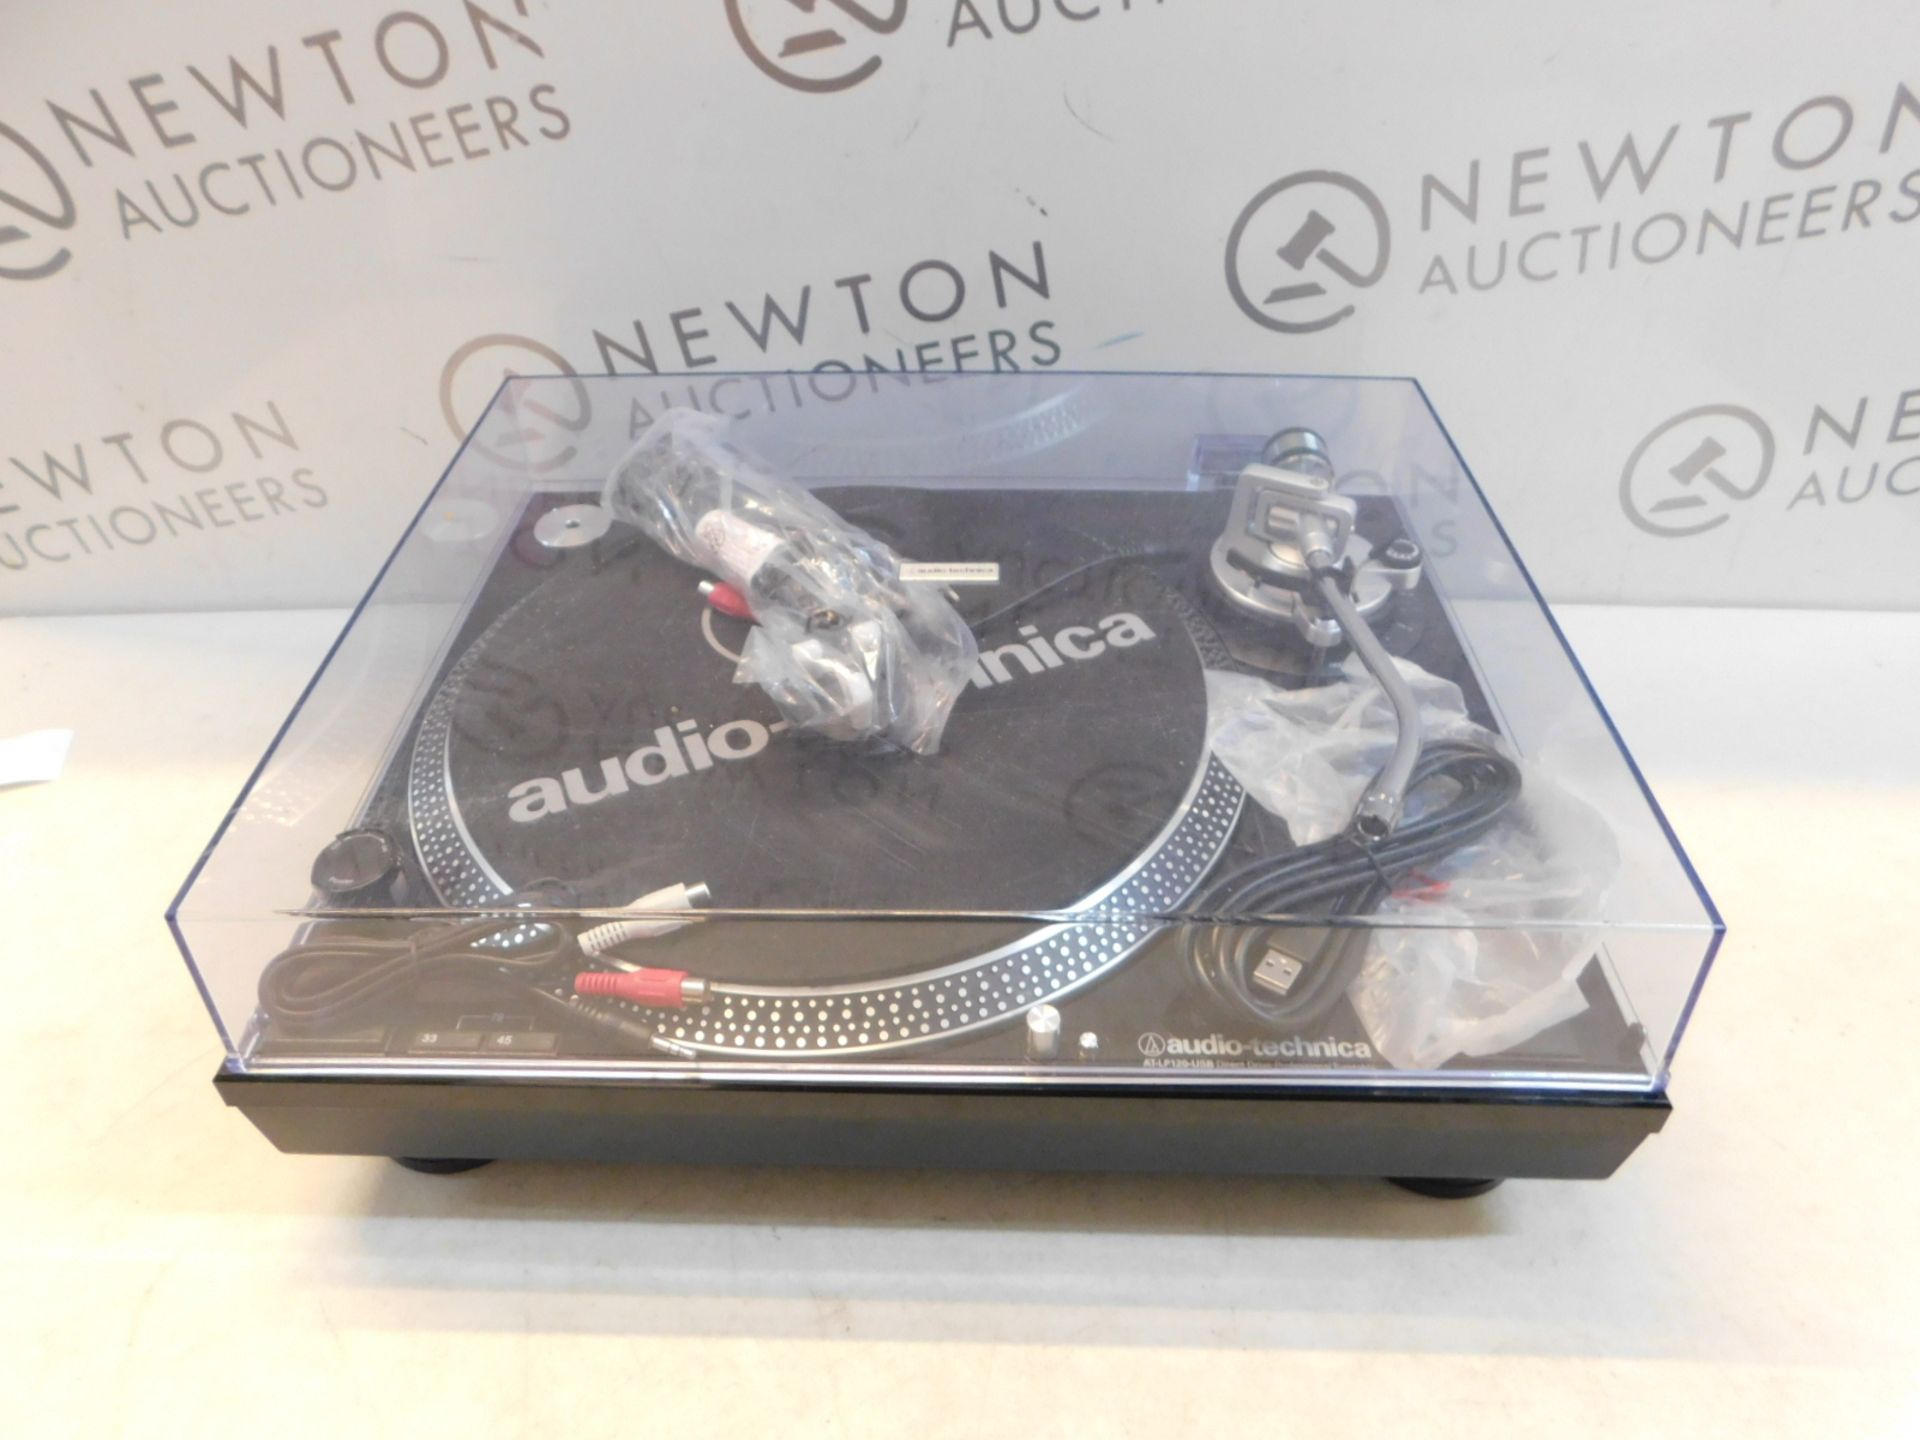 1 AUDIO-TECHNICA AT-LP120BK-USB DIRECT DRIVE TURNTABLE RRP Â£299